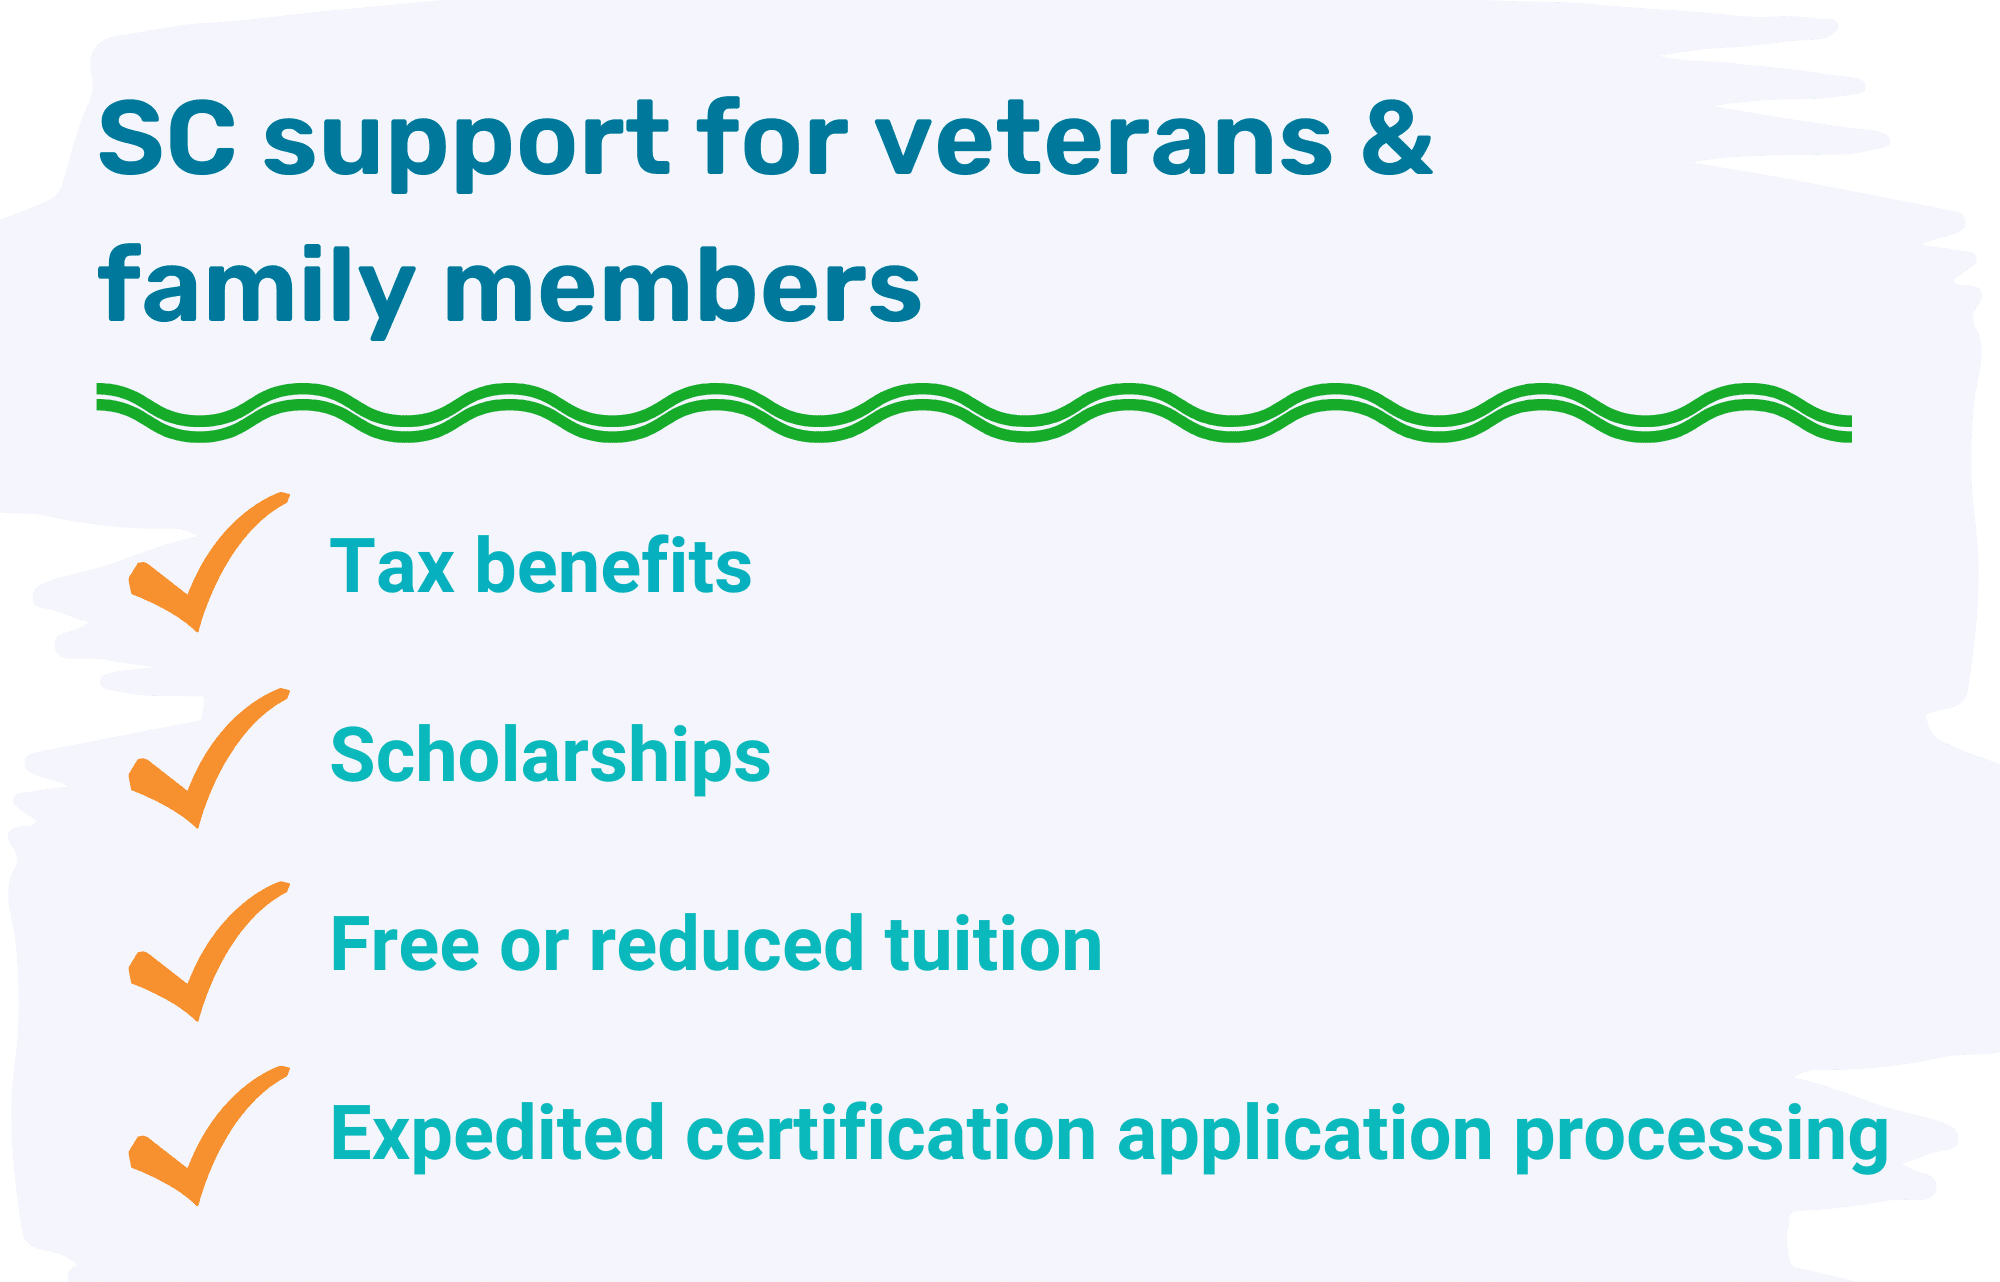 A summary of South Carolina support for veterans and family members: tax benefits, scholarships, free or reduced tuition, expedited certification application processing